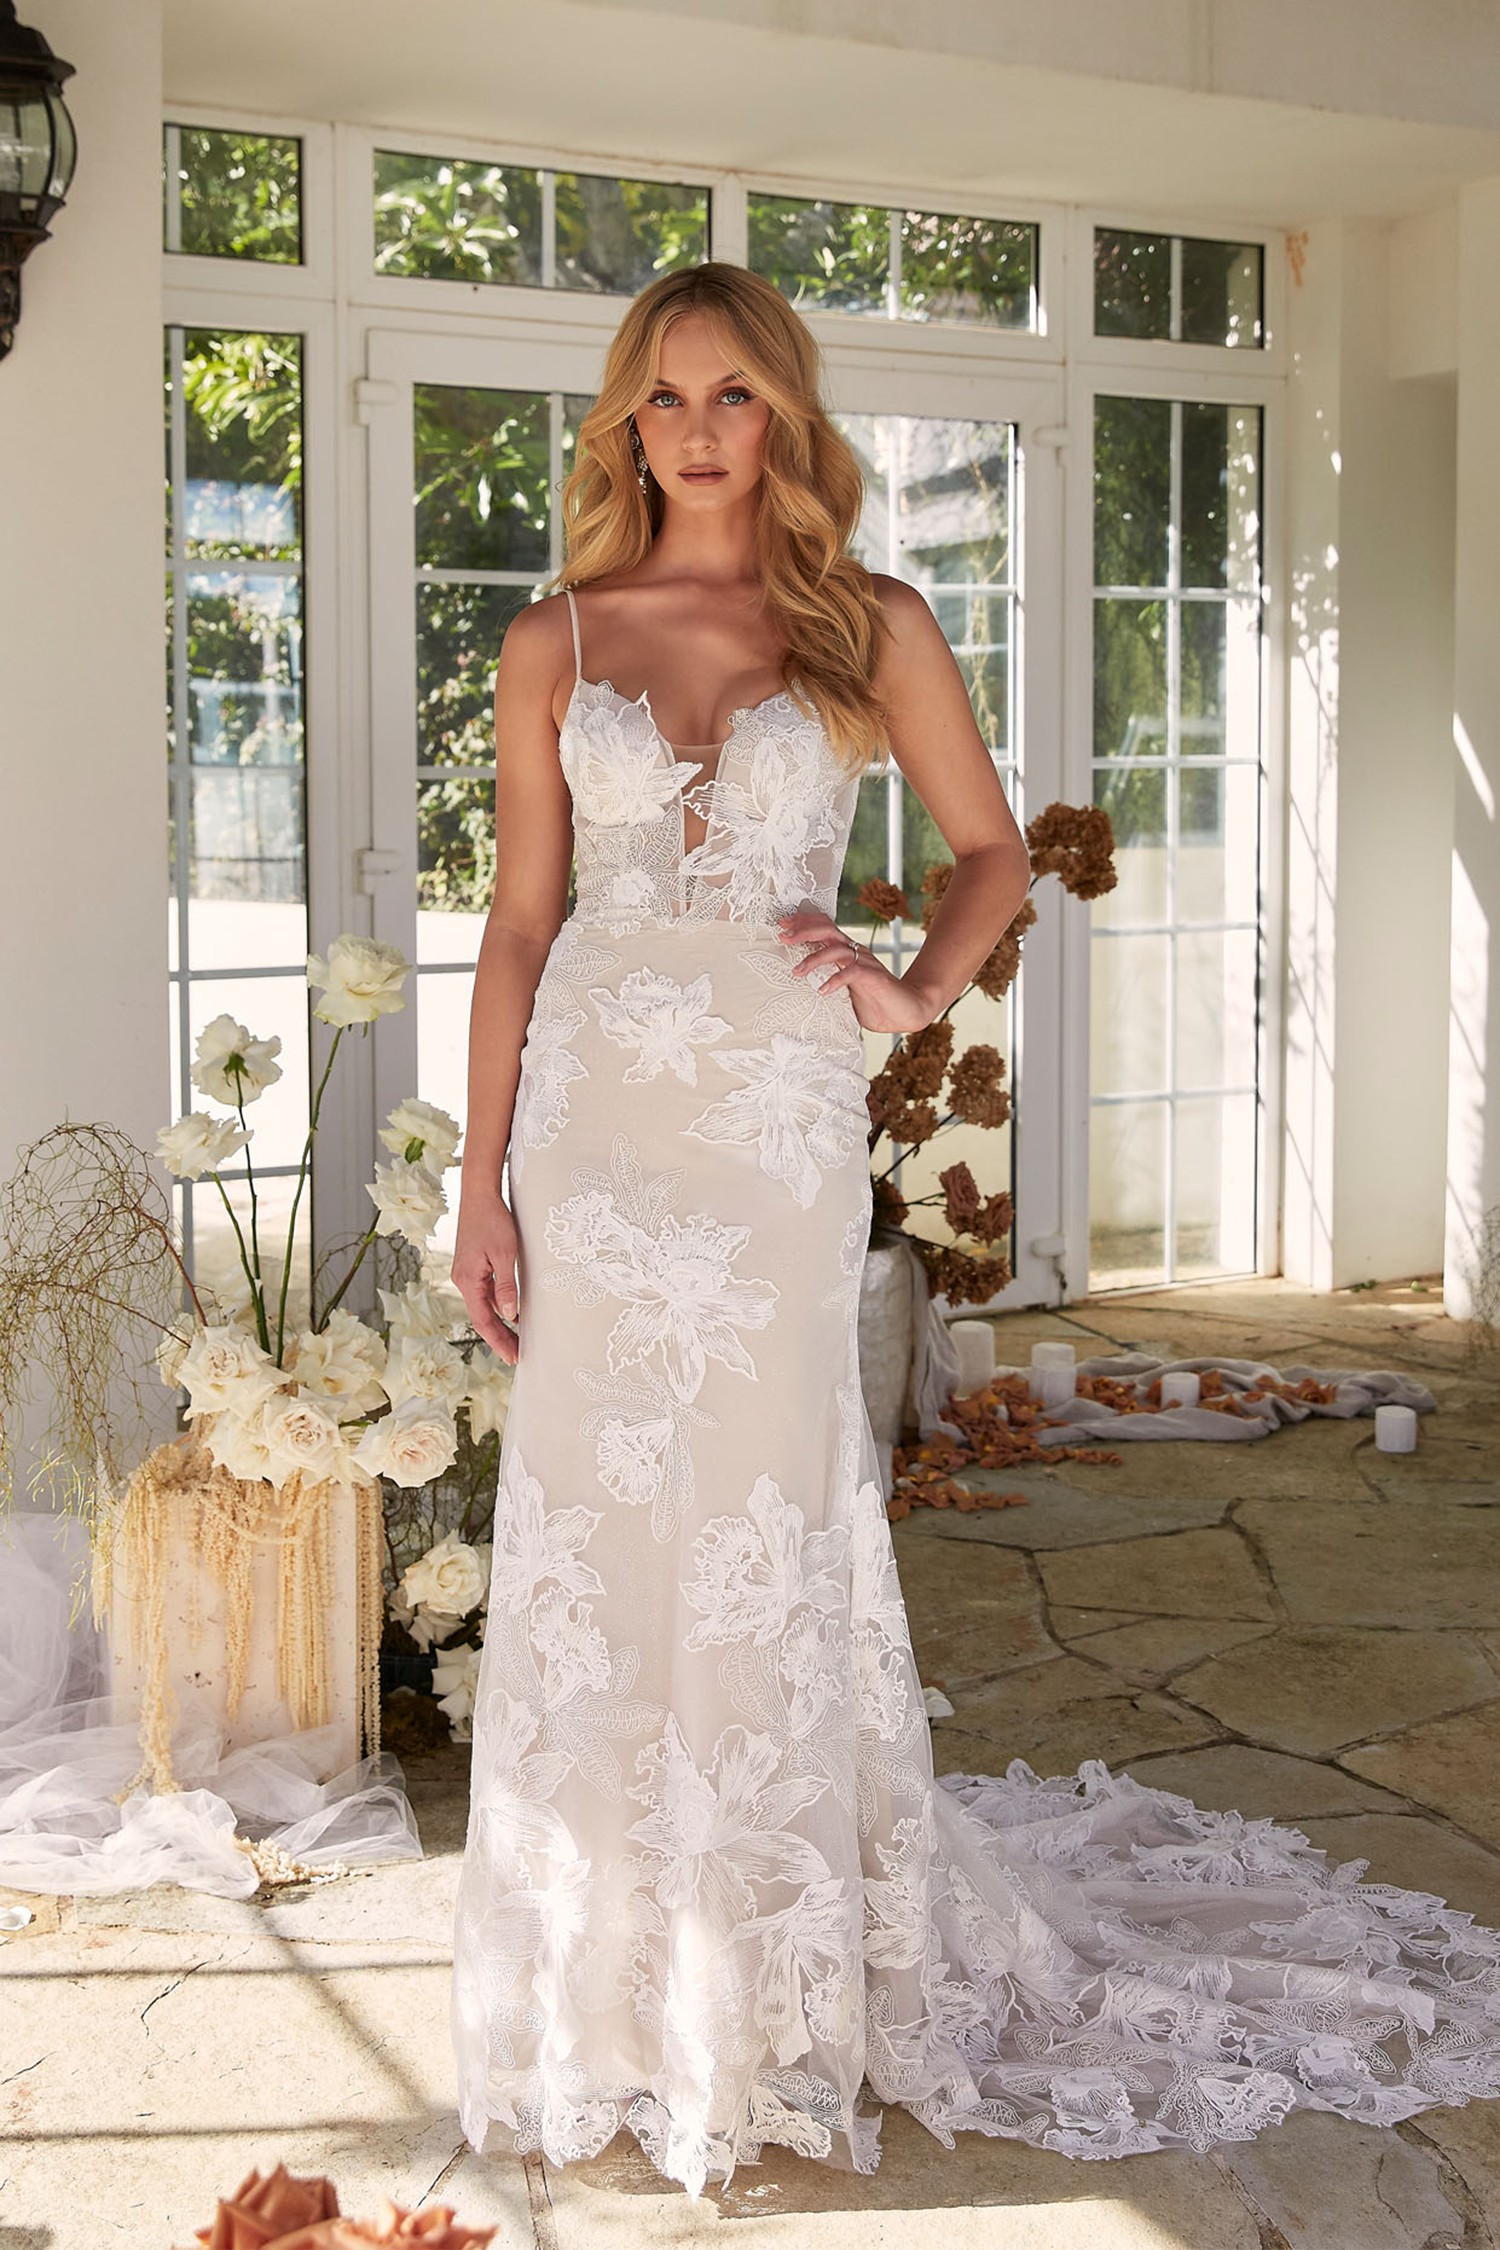 Daria Ml22222 Full Length Fitted Floral Lace Gown Illusion Bodice With Low Back Thin Straps Plunging Neckline Button And Zipper Closure Wedding Dress Madi Lane Bridal 1